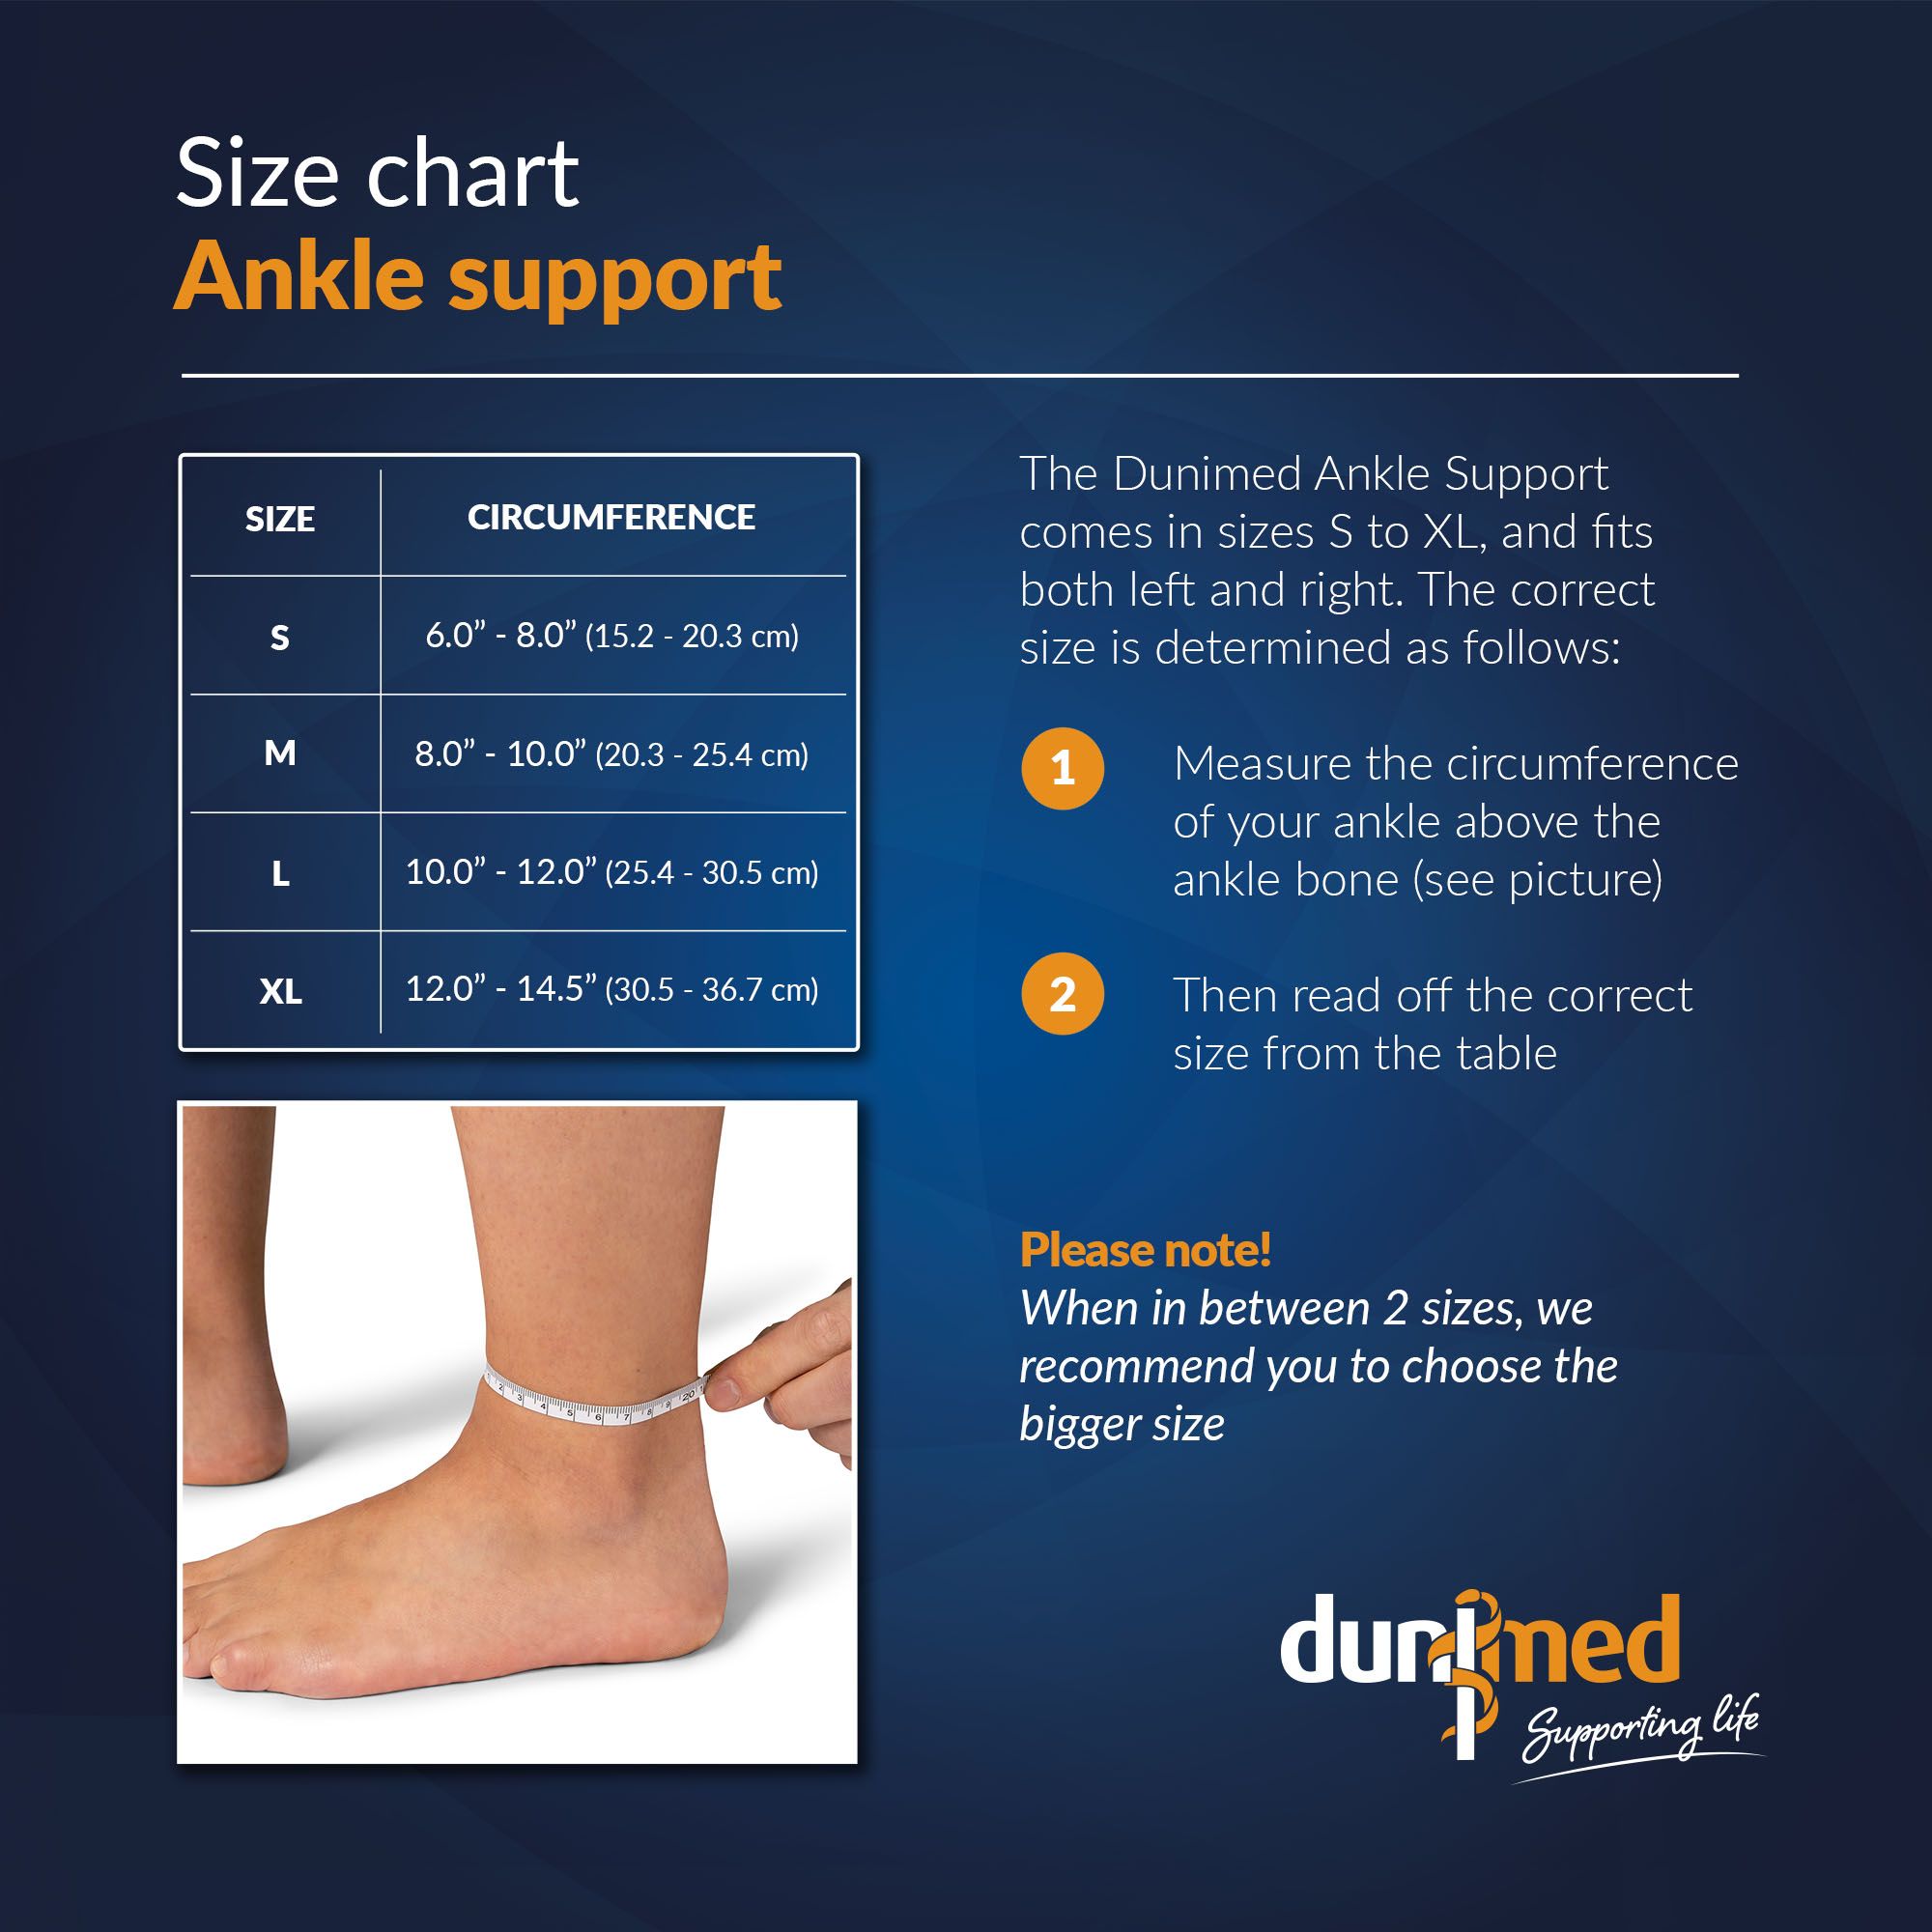 Size chart Dunimed Ankle Support